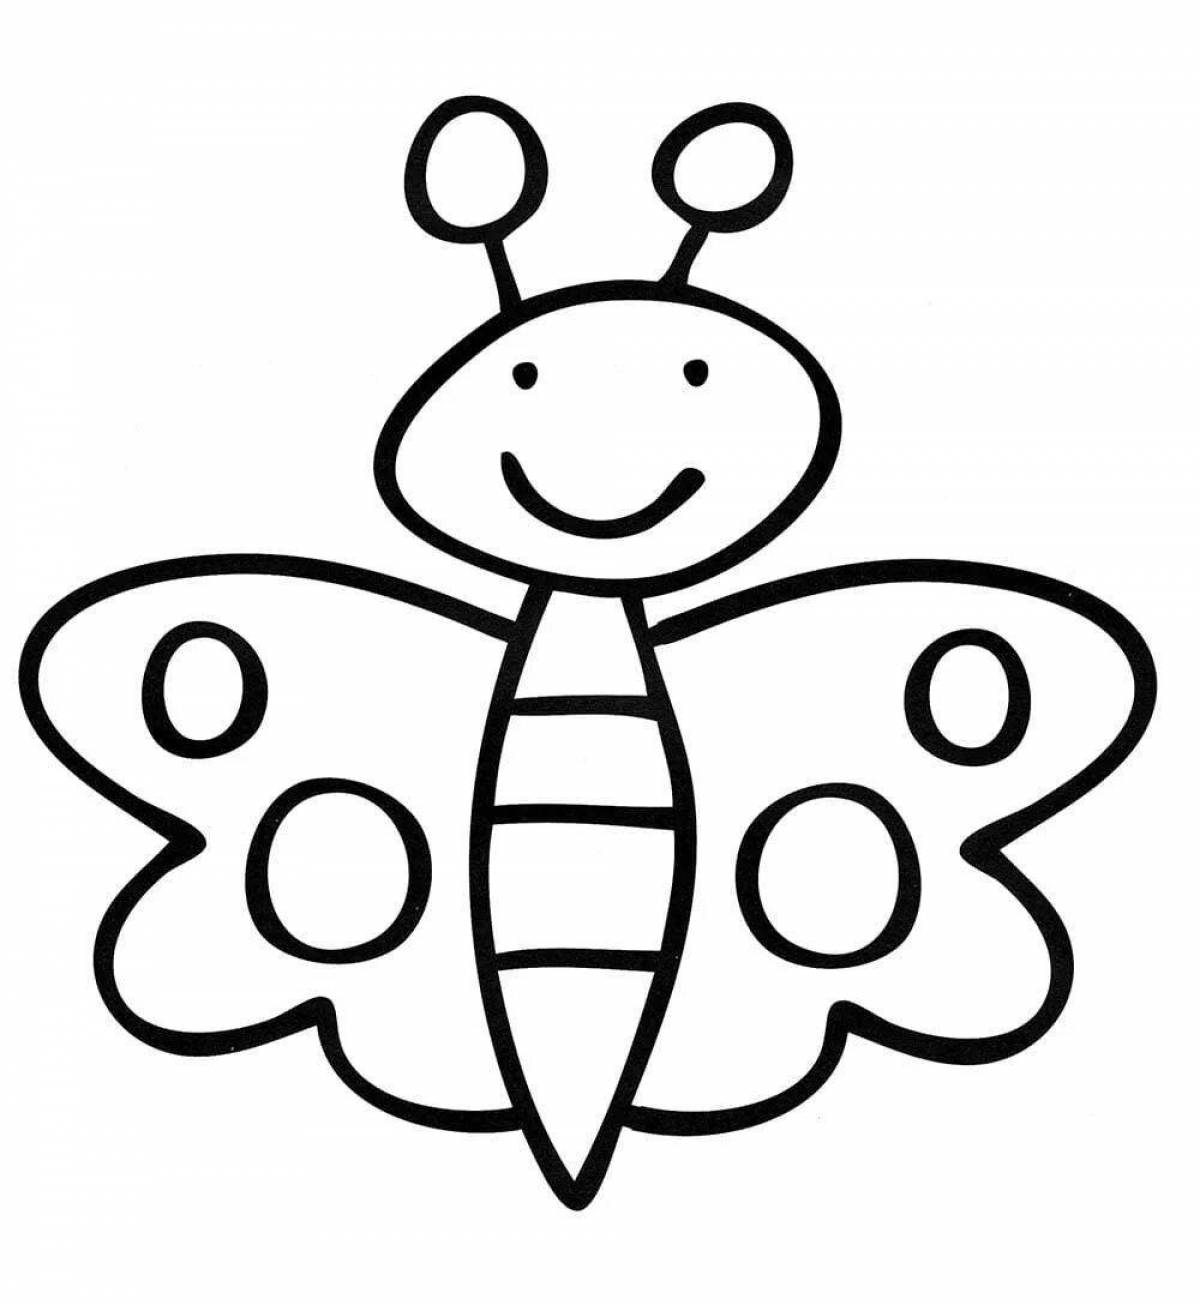 Coloring pages for girls 2-3 years old